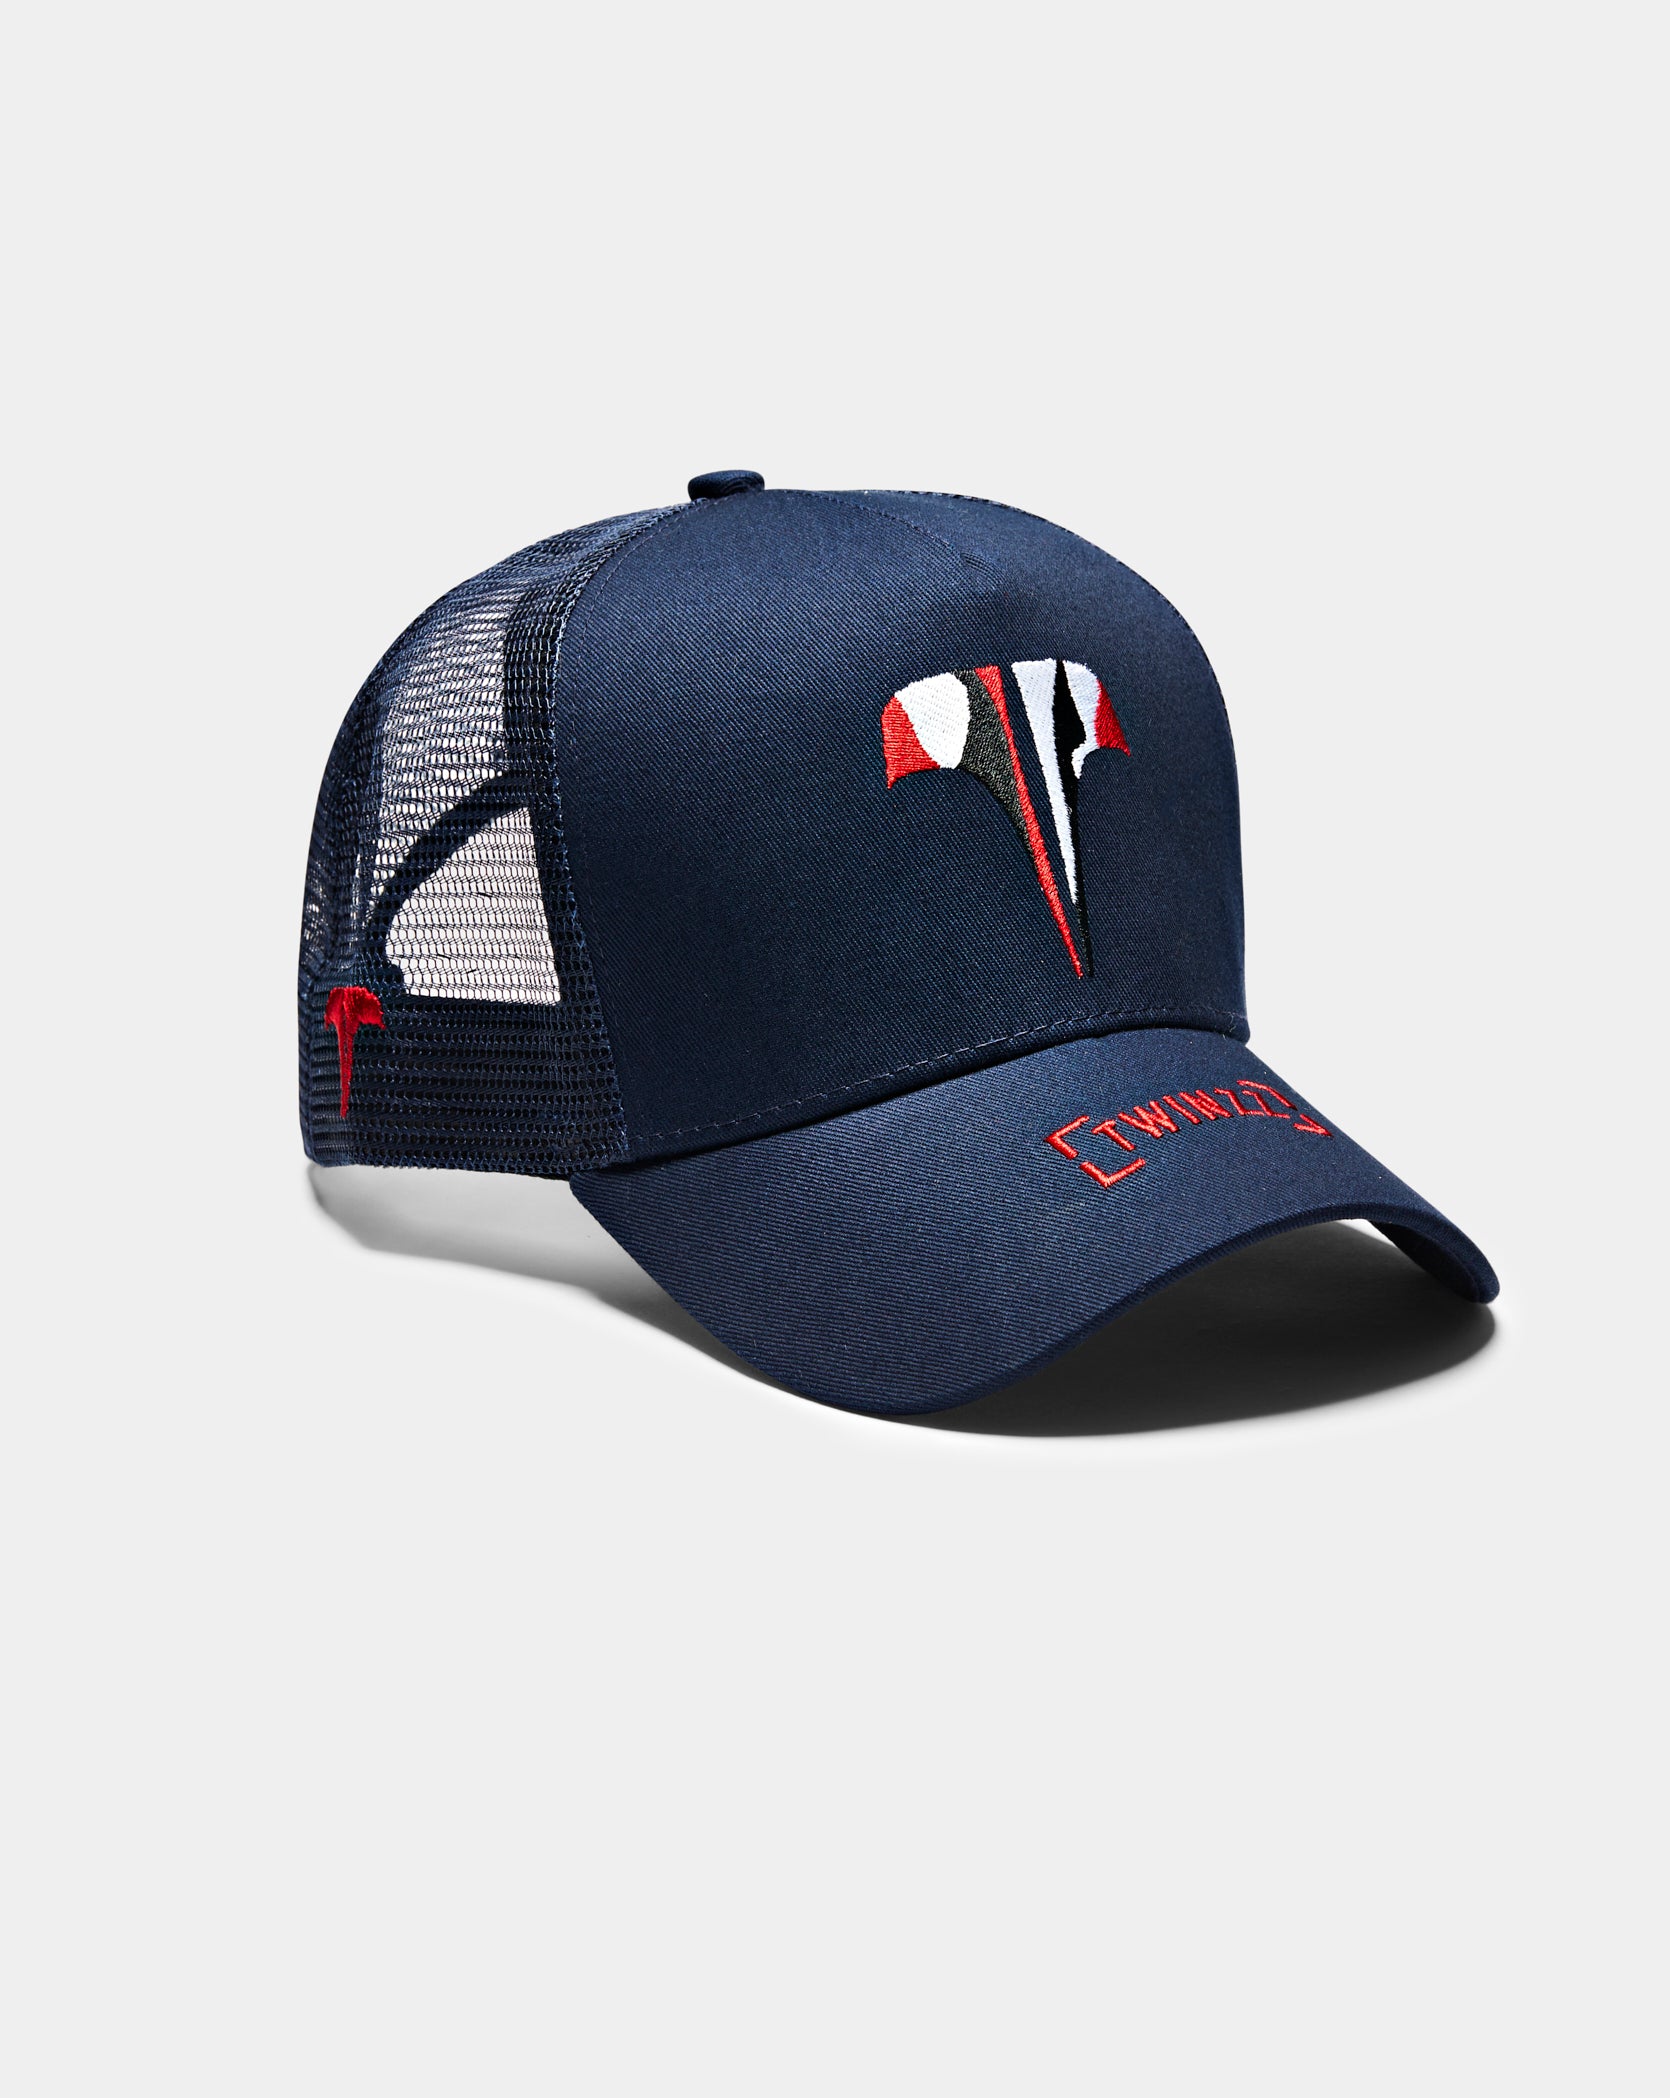 Twinzz navy trucker hat with red and white logo